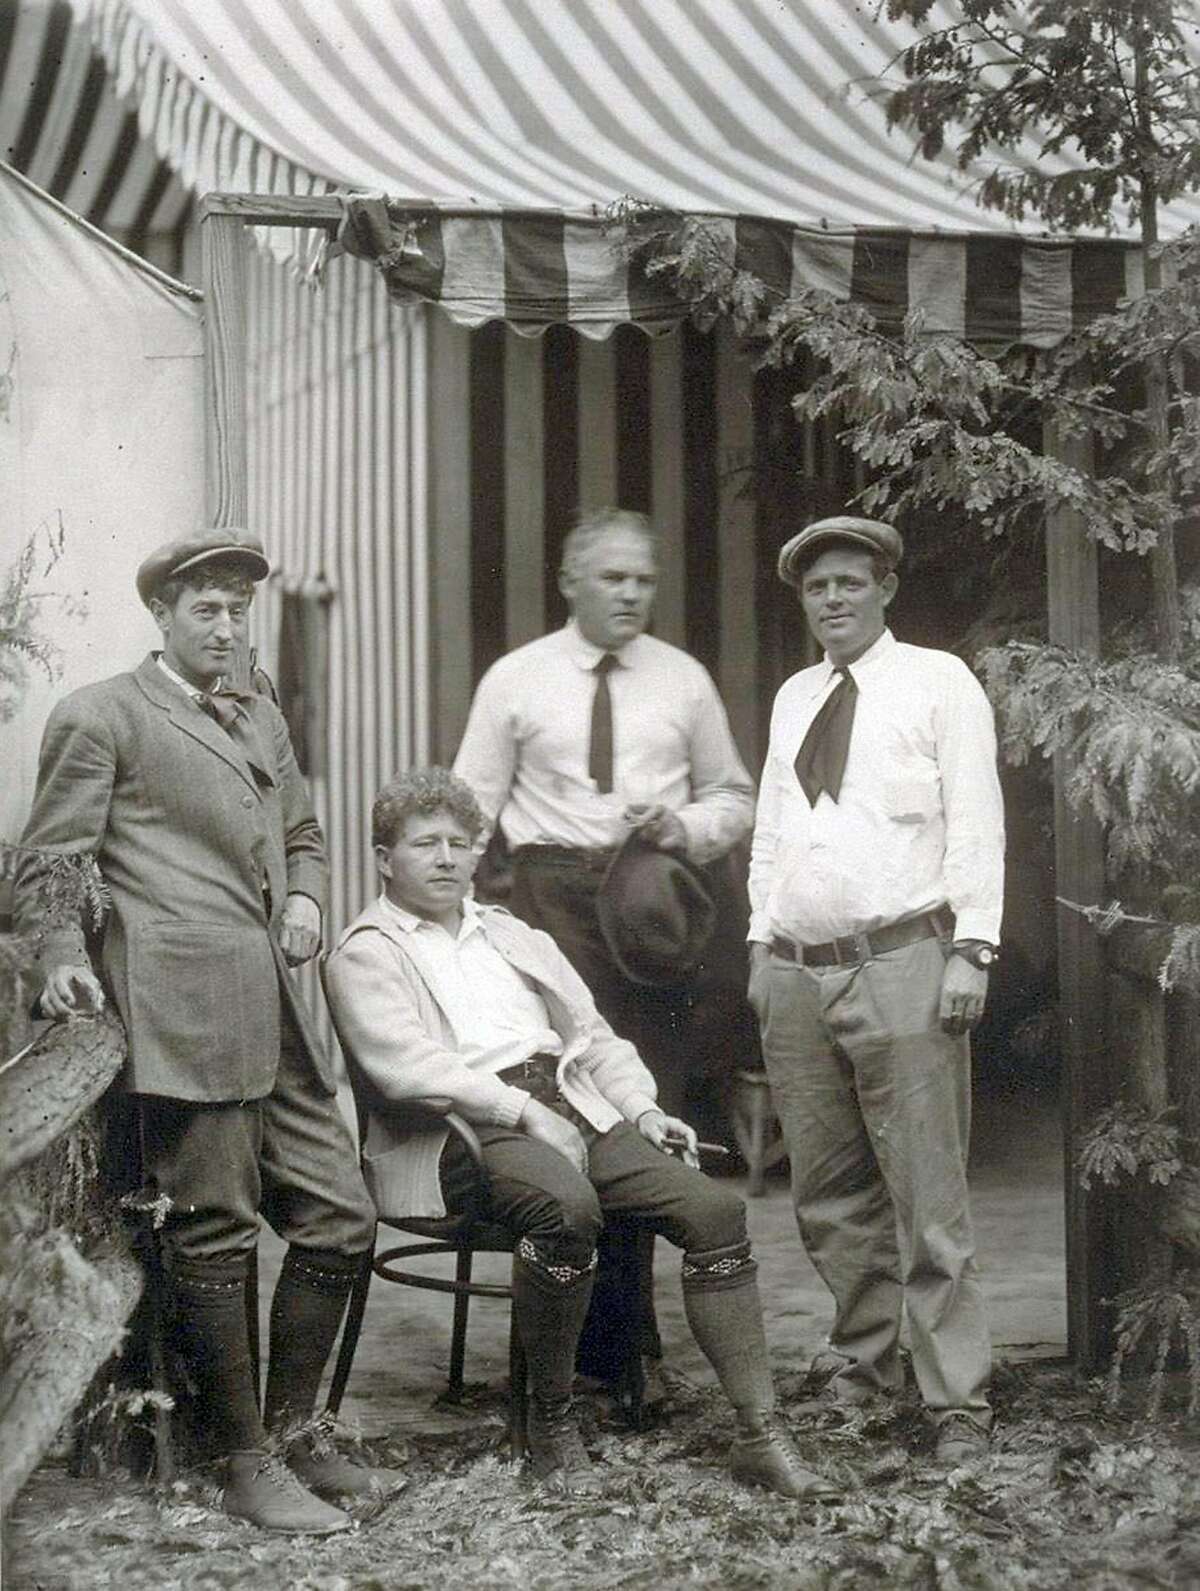 Poet George Sterling, a man of many contradictions (left), hangs out with journalist Jimmy Hopper and authors Harry Leon Wilson and Jack London at the Bohemian Grove in 1913.